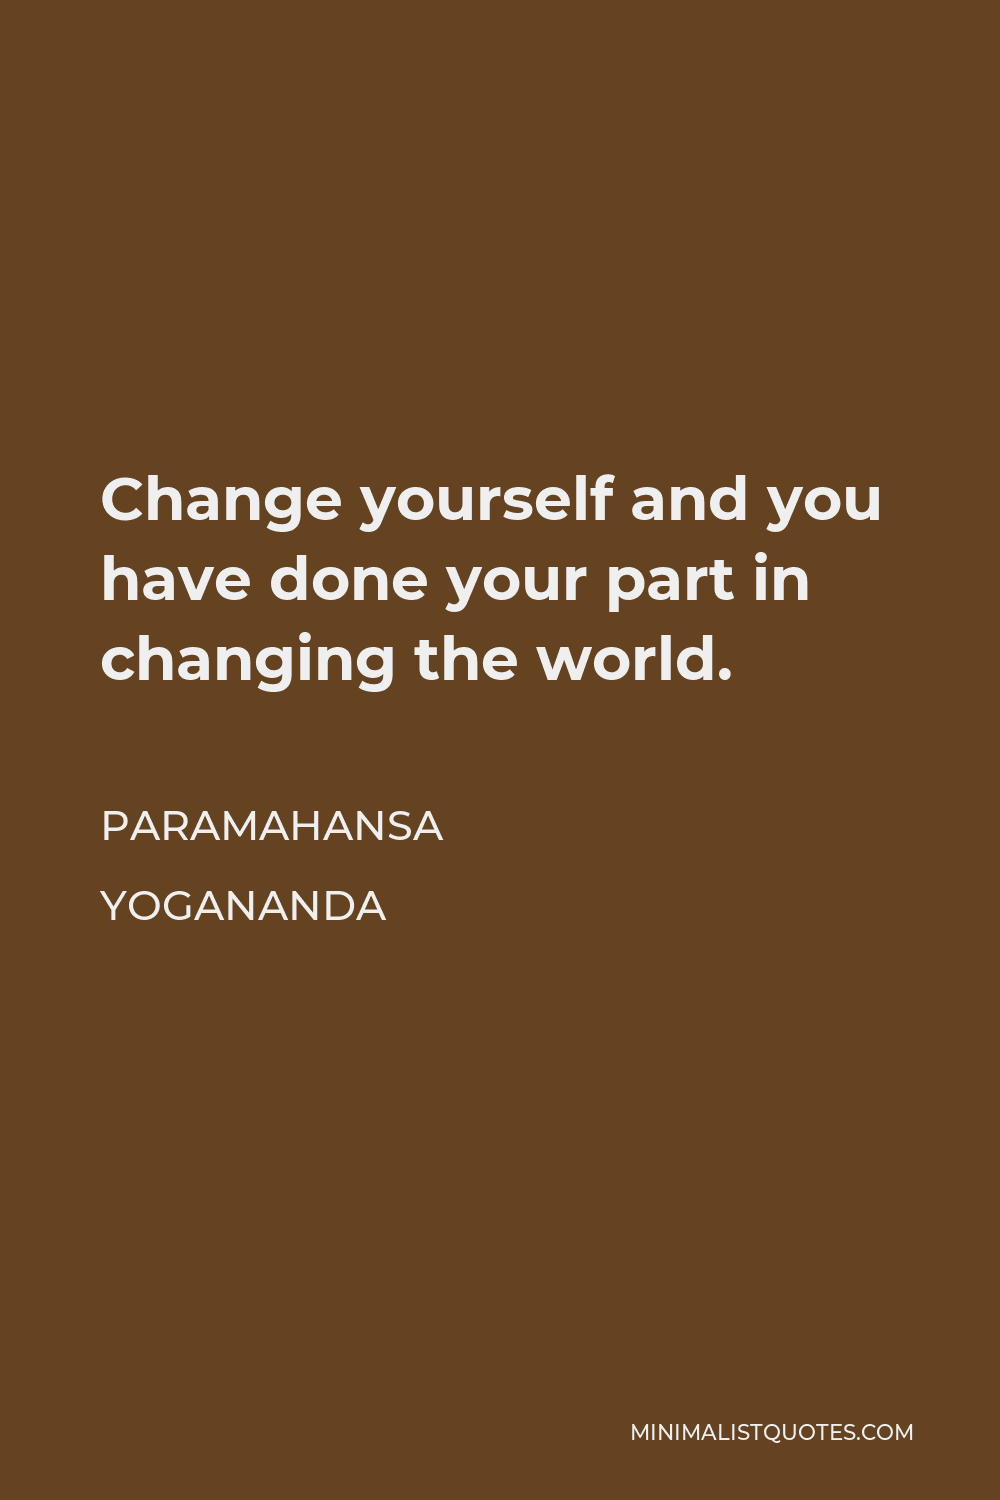 Paramahansa Yogananda Quote - Change yourself and you have done your part in changing the world.